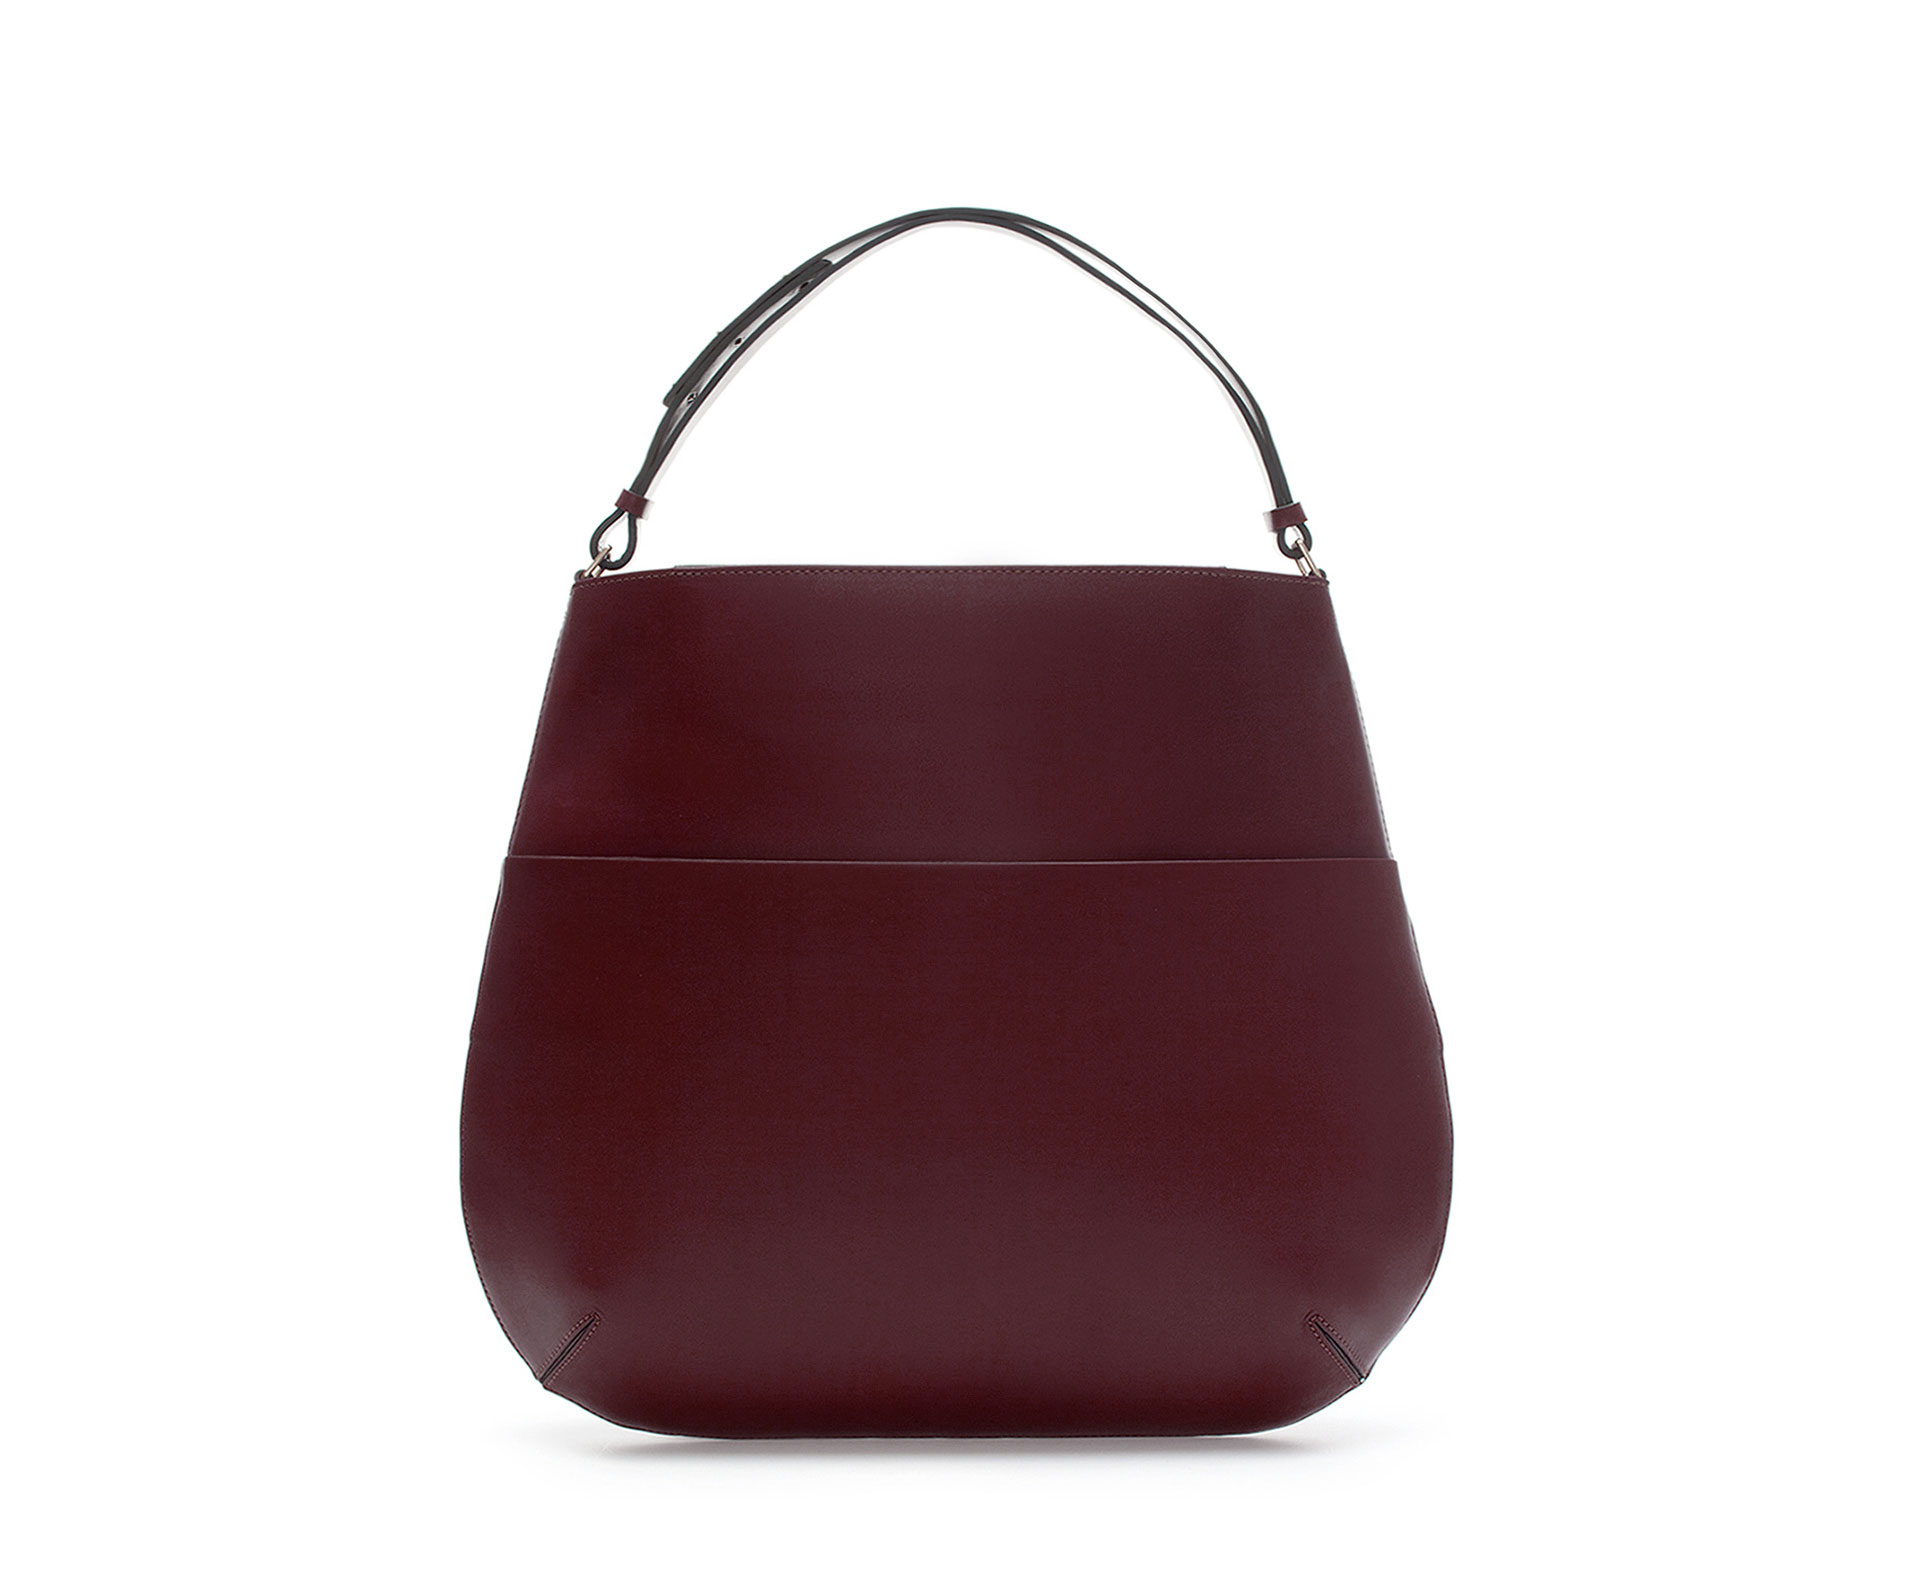 Zara Limited Edition Leather Tote Shopper in Purple | Lyst